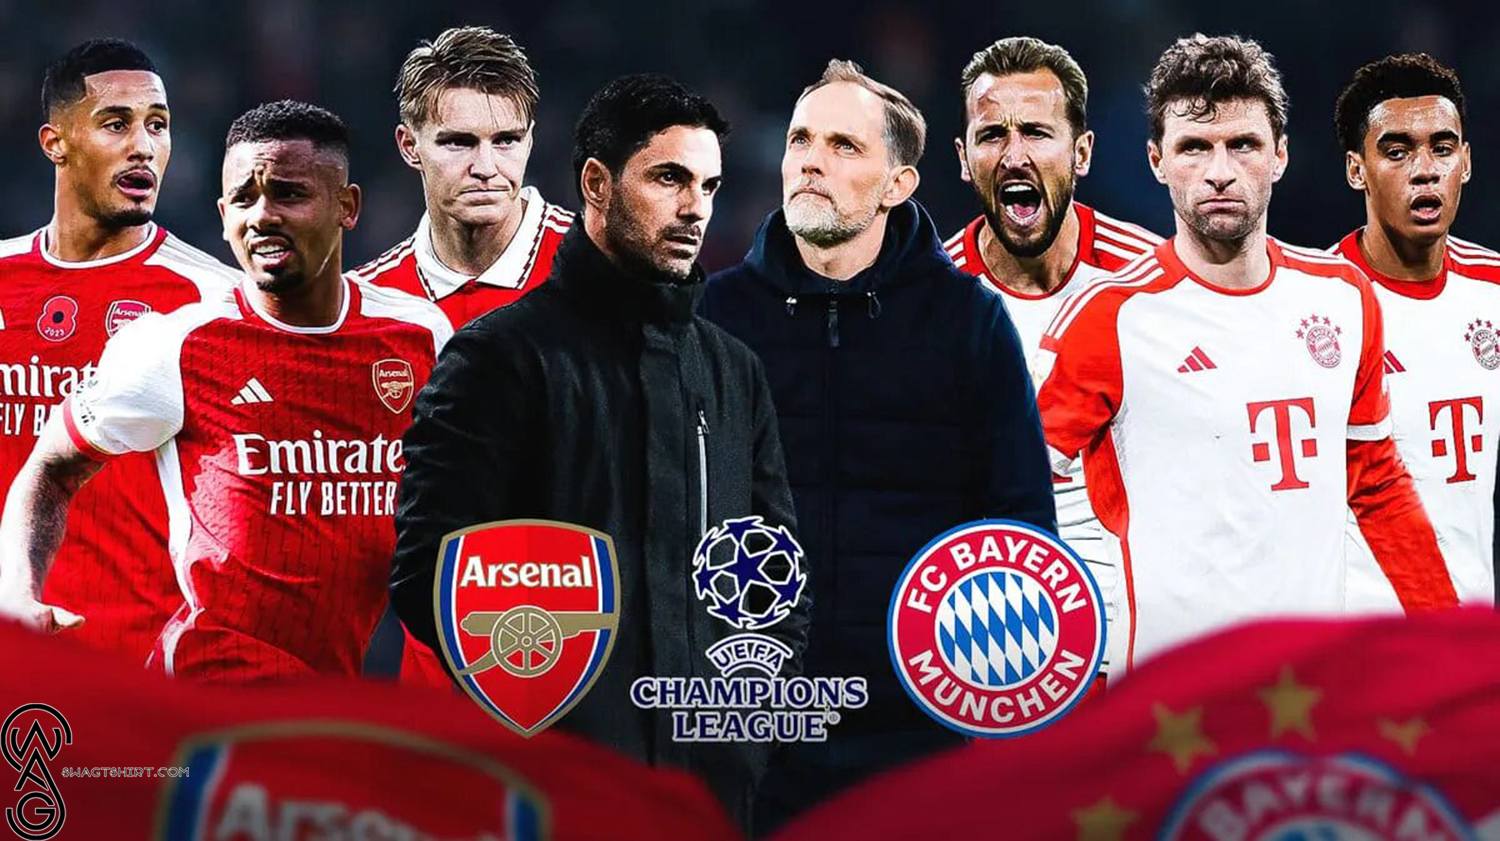 Nine Words For Bayern Munich Müller's Bold Prediction Sets Stage for Arsenal Showdown